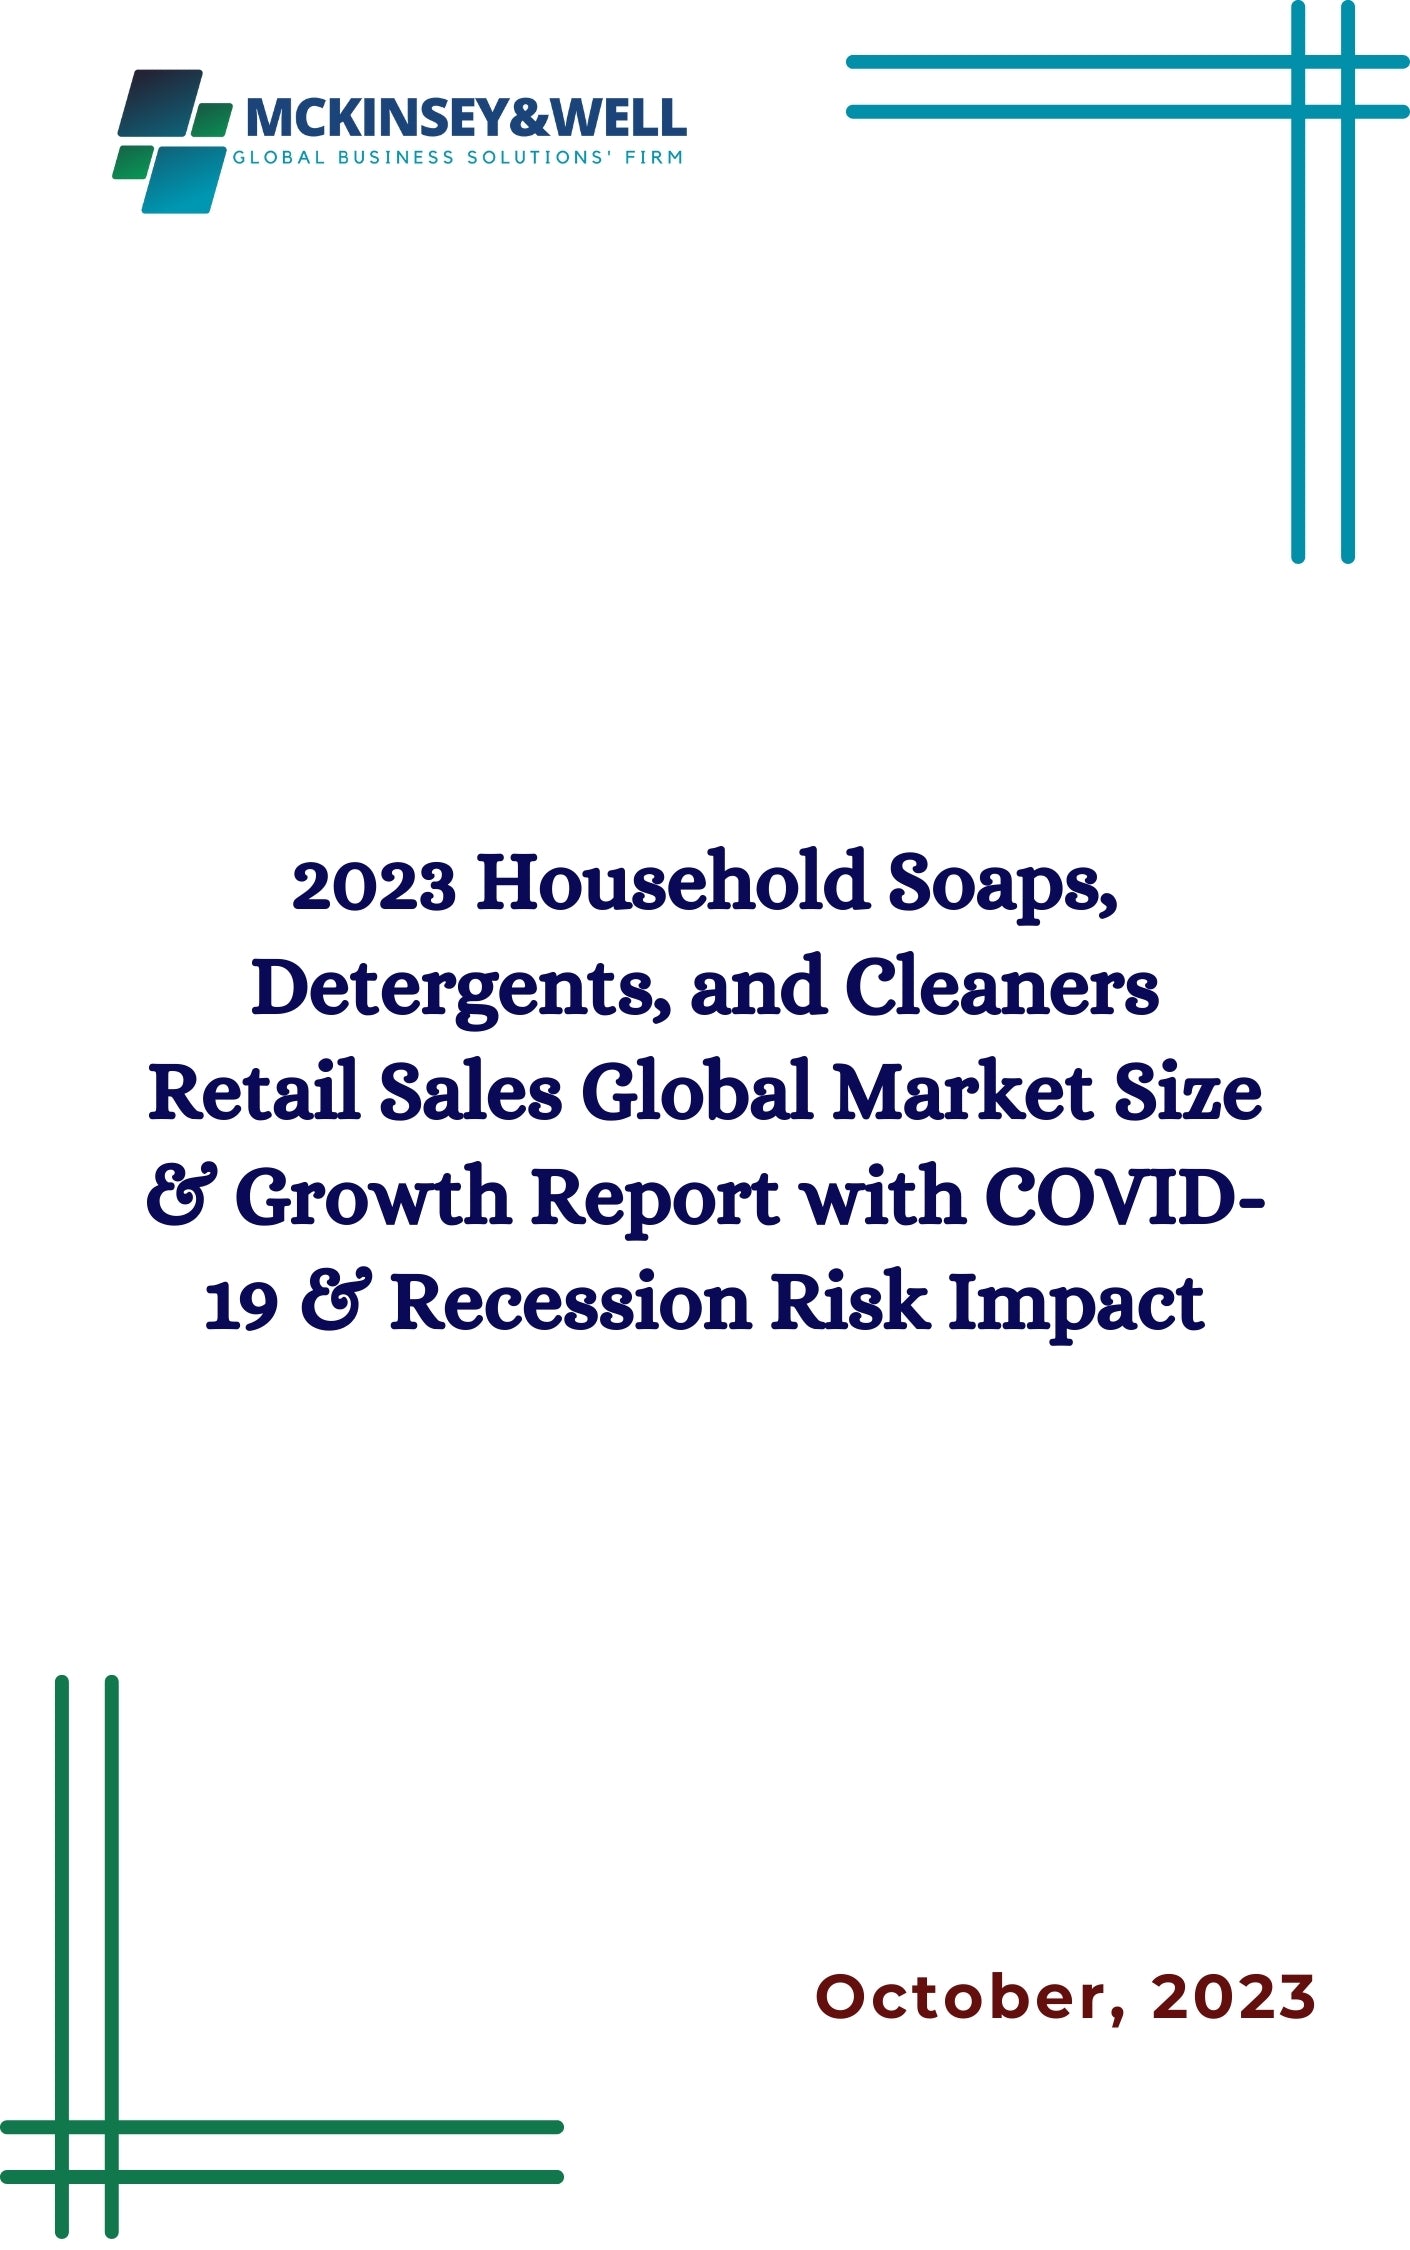 2023 Household Soaps, Detergents, and Cleaners Retail Sales Global Market Size & Growth Report with COVID-19 & Recession Risk Impact